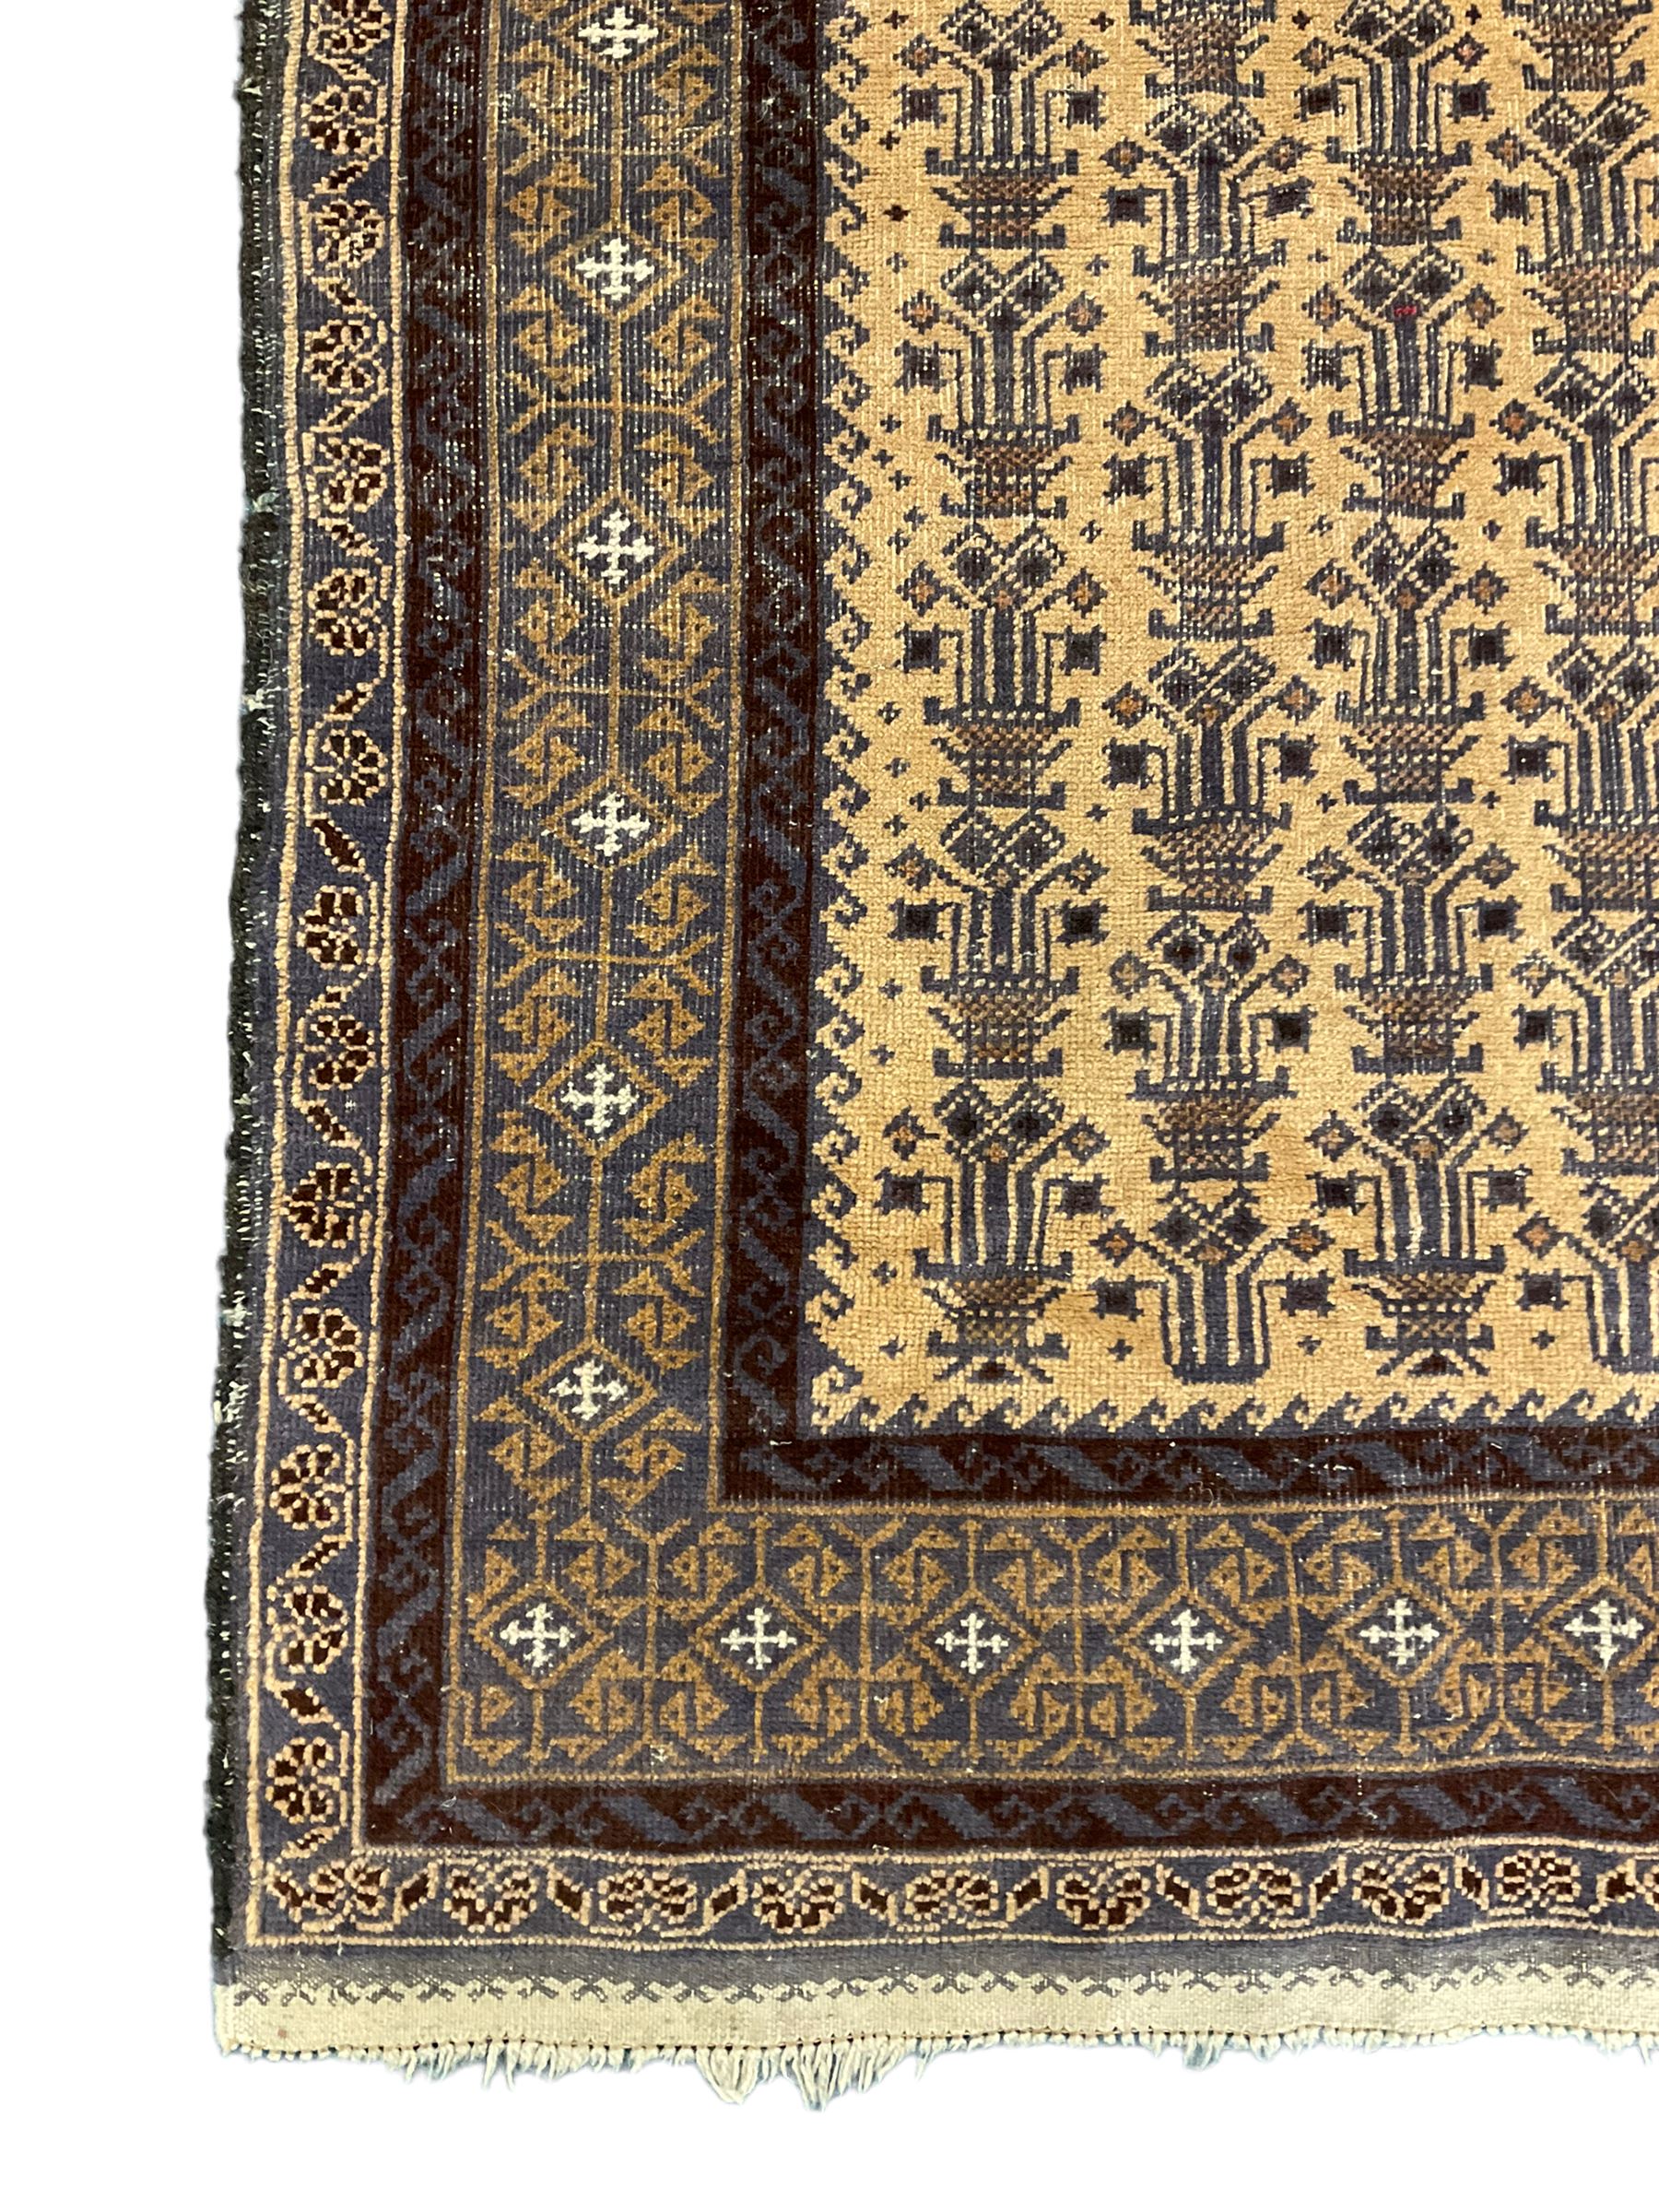 Persian pale ground rug - Image 3 of 4